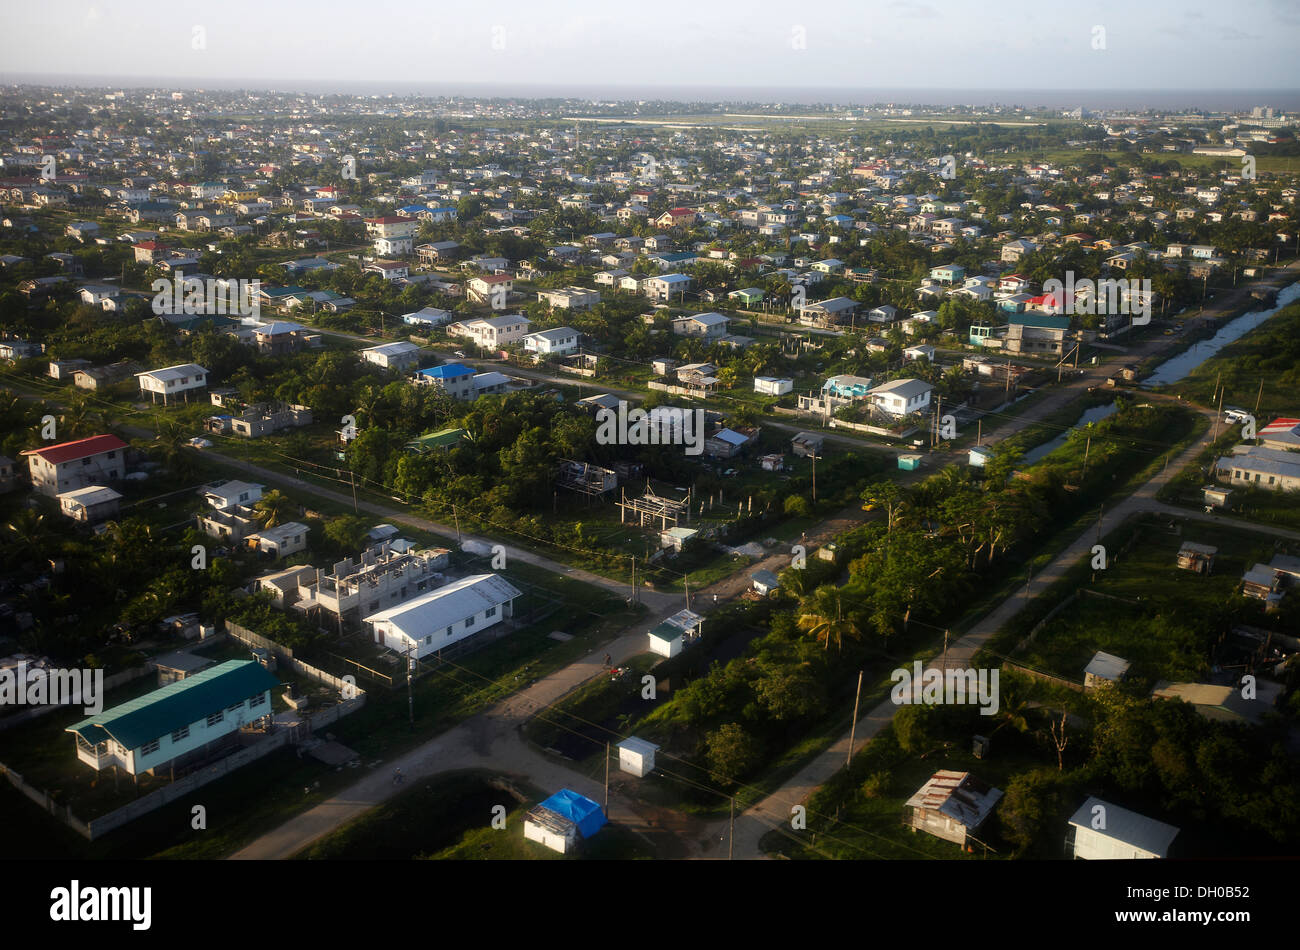 Aerial view of Georgetown, Guyana, South America, showing the urban sprawl and housing development. Stock Photo